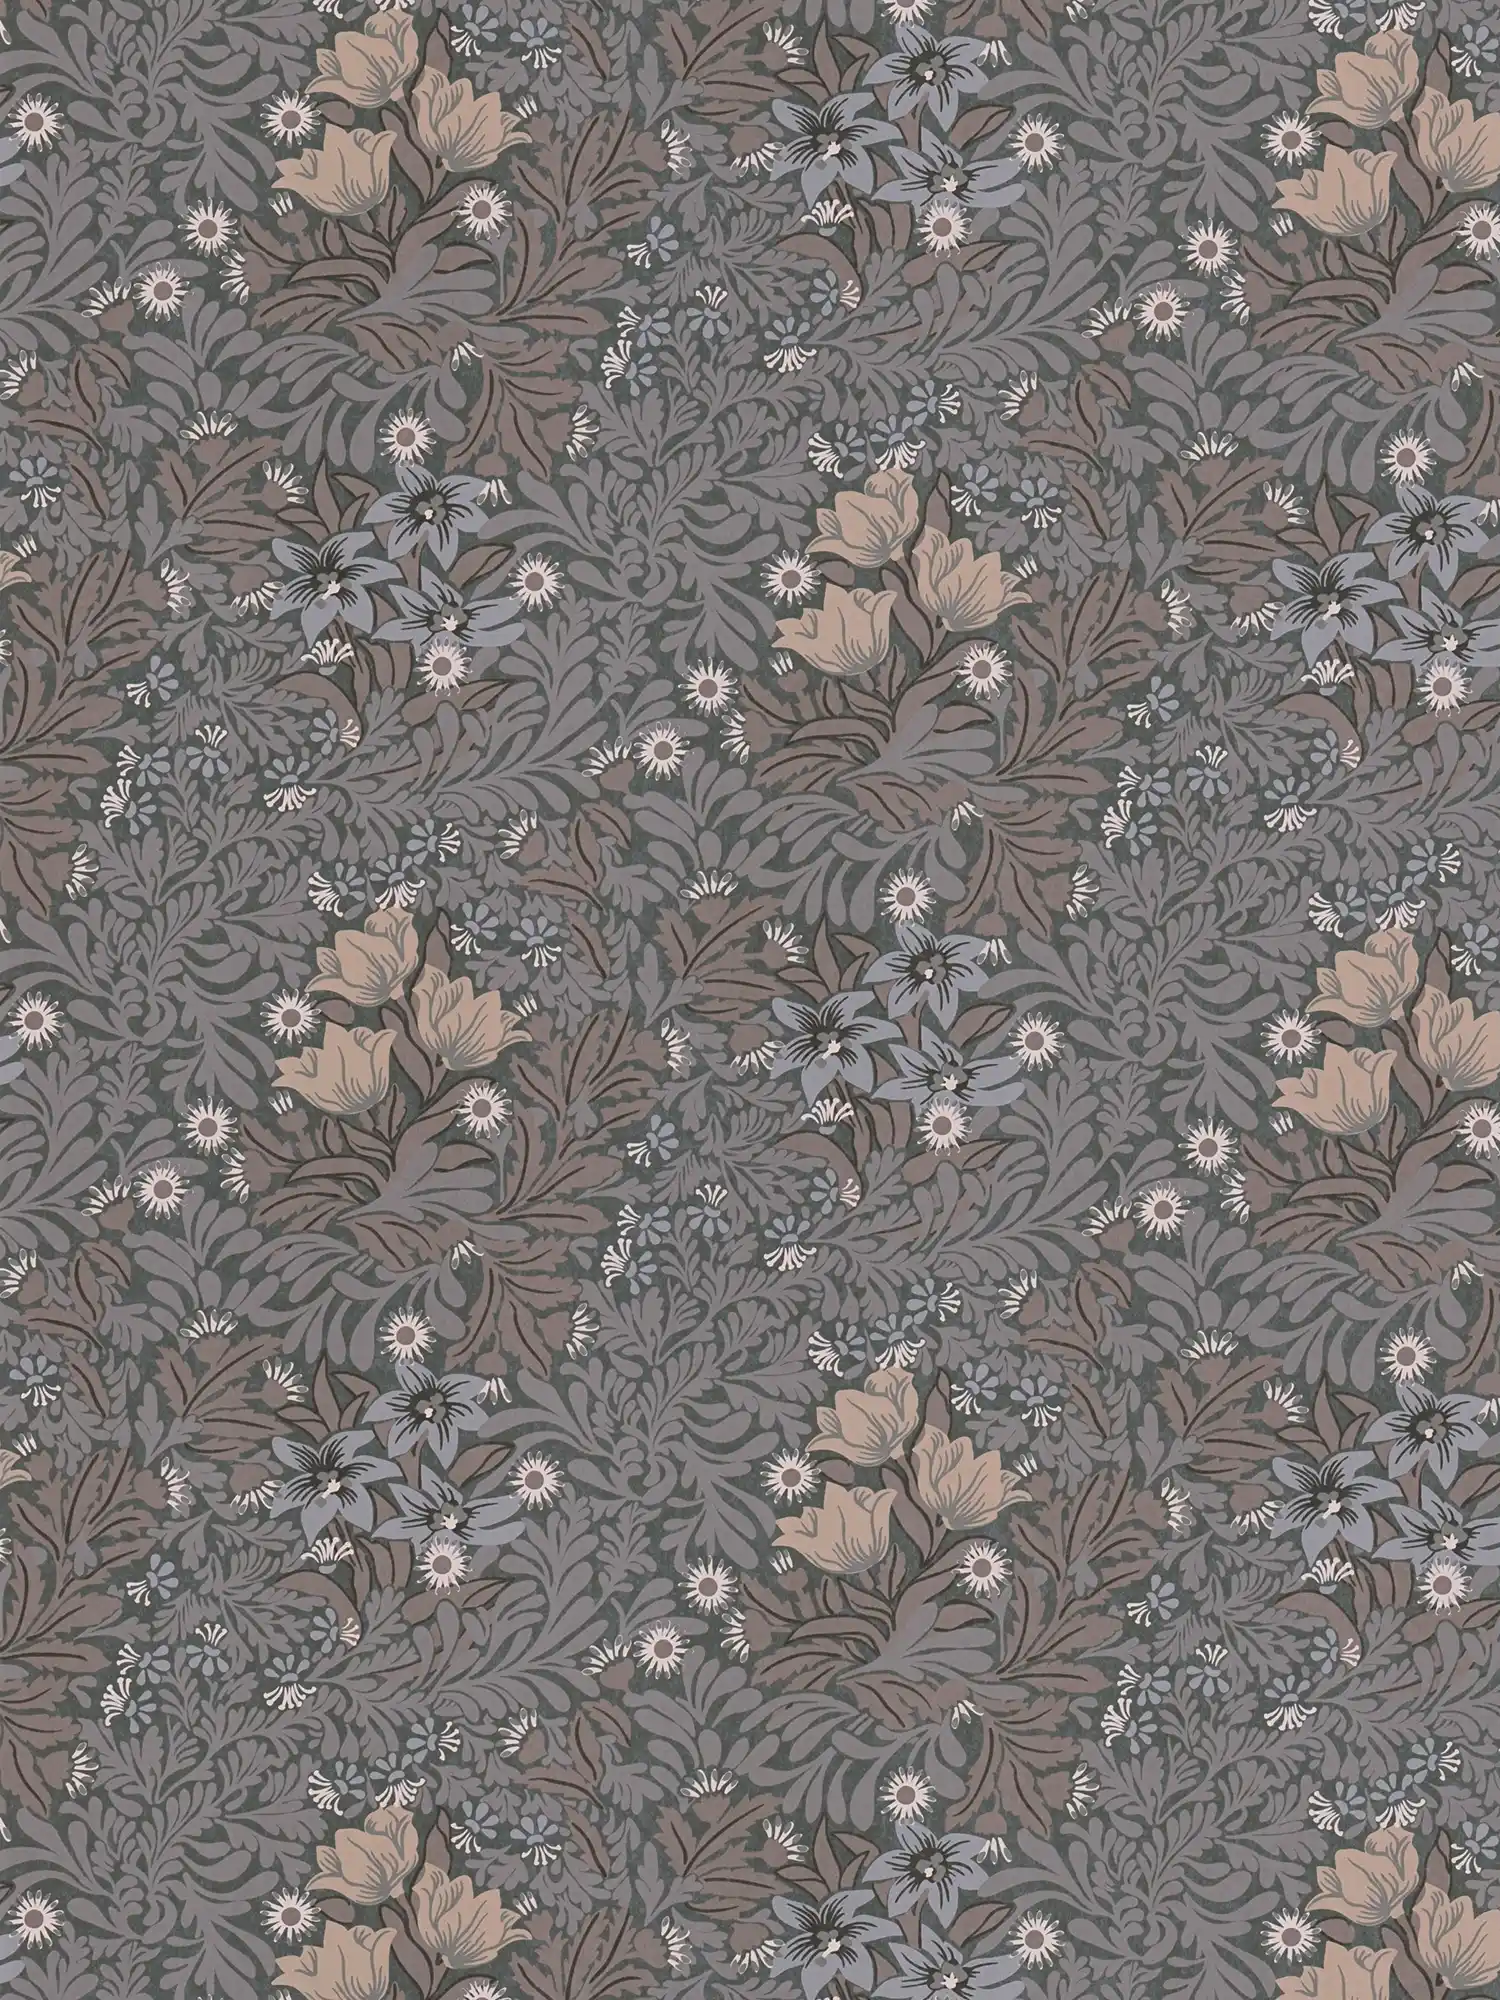 Floral wallpaper with various flowers and vines - grey , beige, brown
